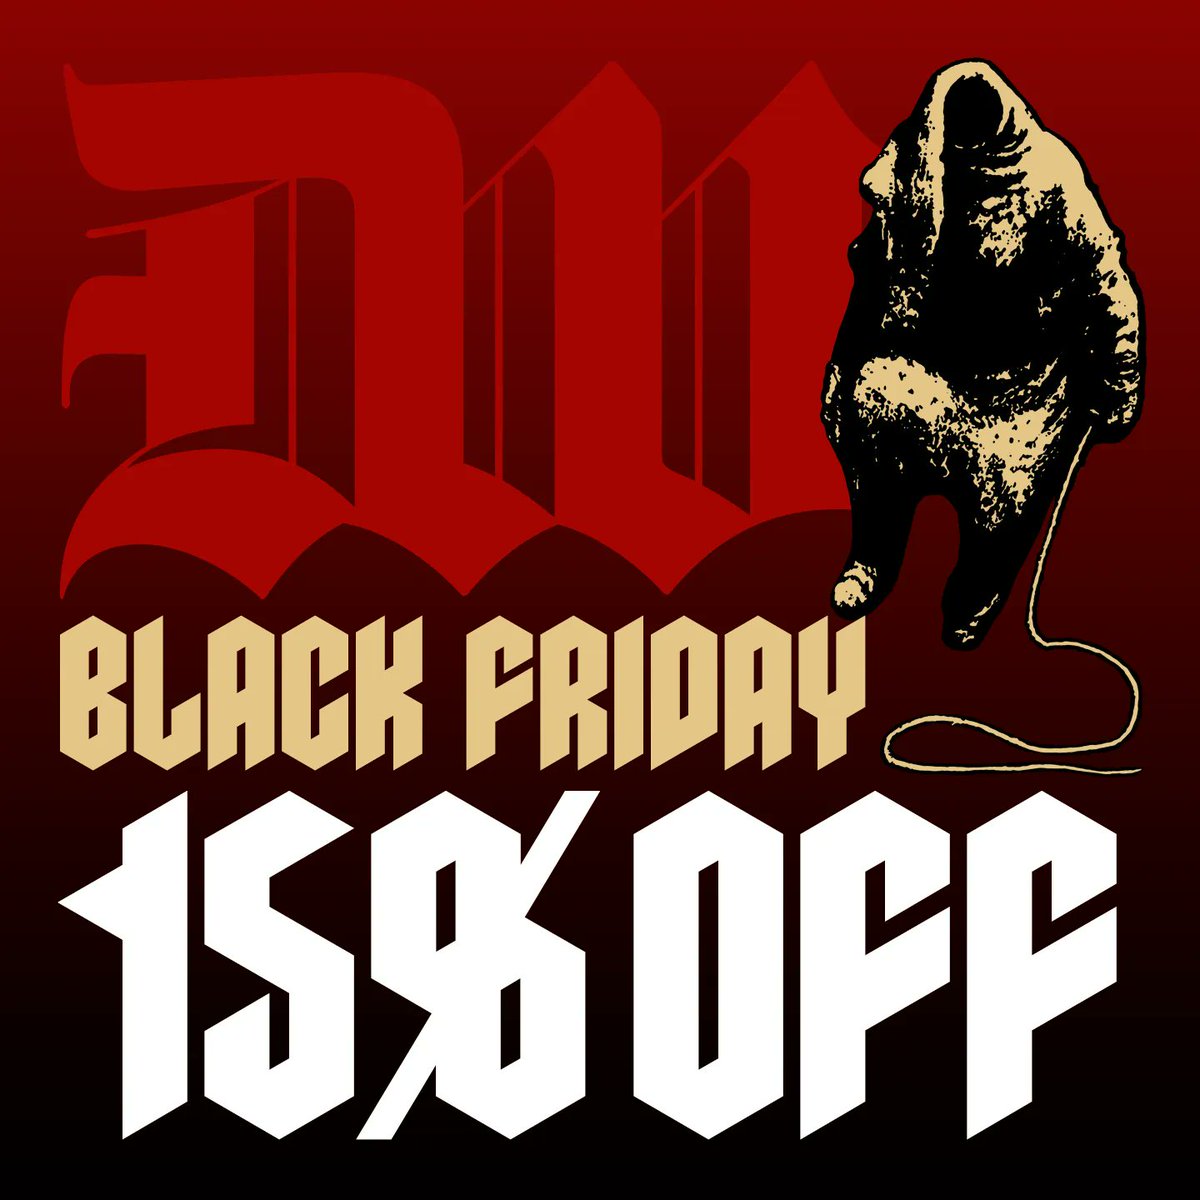 The @deathwishinc Black Friday Sale is back by popular demand! Get 15% OFF the ENTIRE store with the code “BLACKFRIDAY2021'. • 15% discount storewide with the code “BLACKFRIDAY2021” • 11/24 - 11/29 (Begins 9am EST - Ends 11:59pm EST) • Excludes pre-order and select items